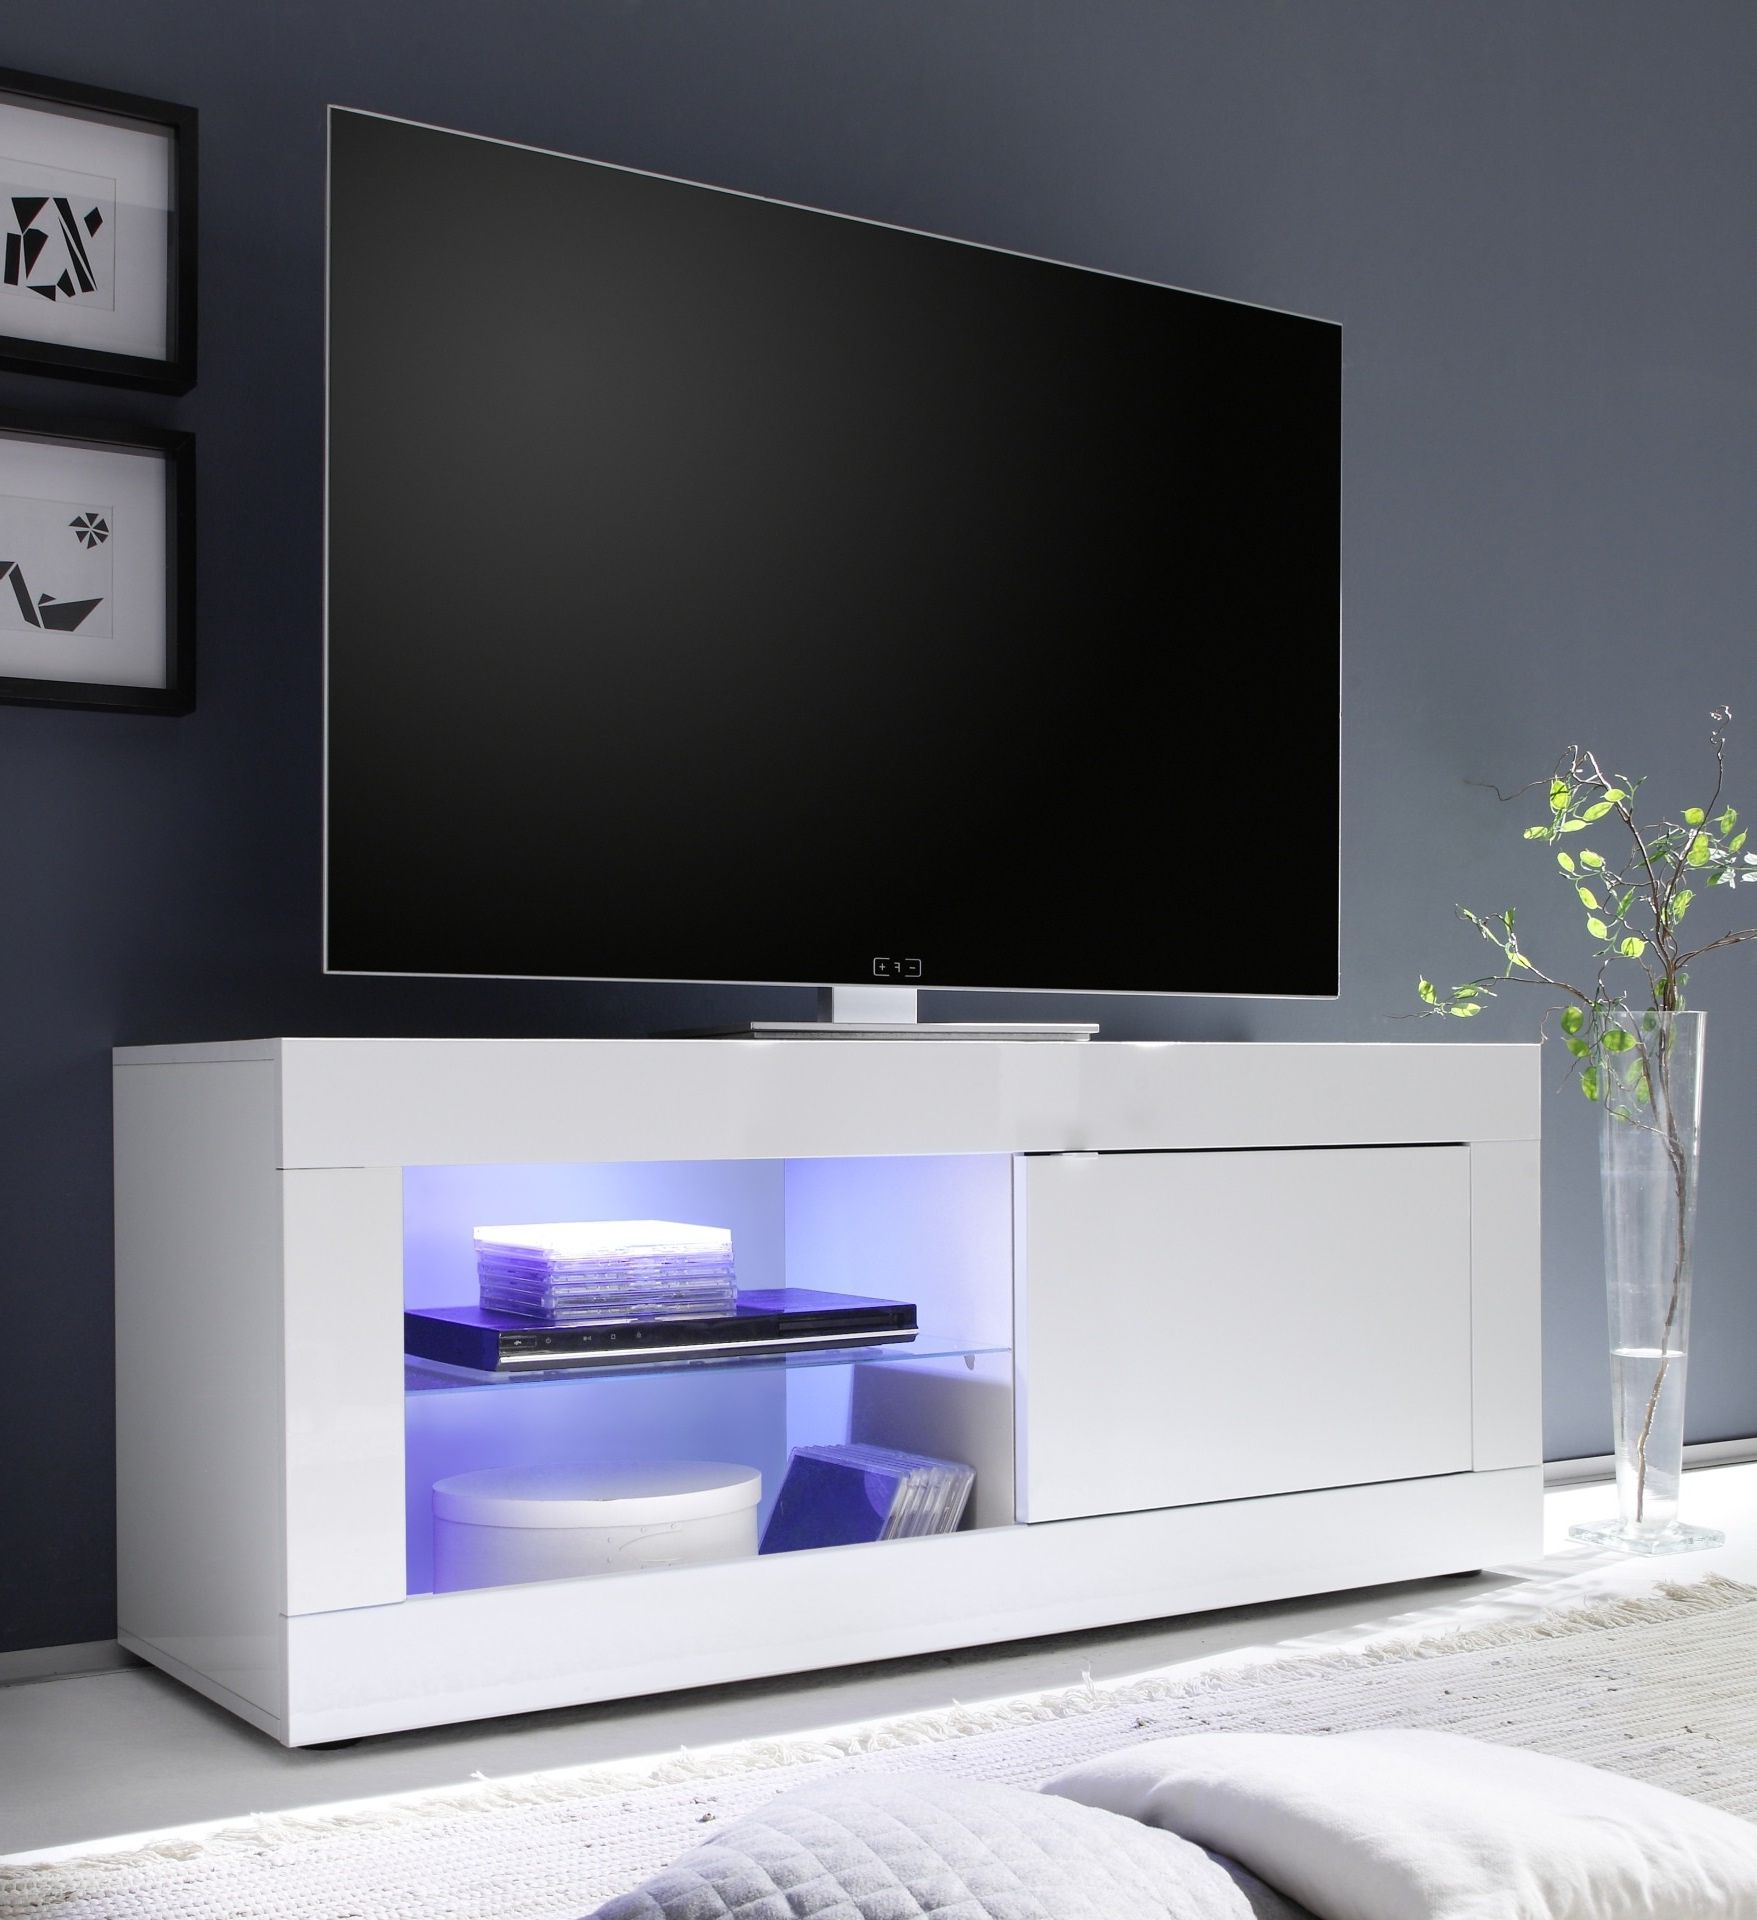 Most Popular Glossy White Tv Stands Within Tv Stands. Glamorous White High Gloss Tv Stand 2017 Design: White (Photo 7 of 20)